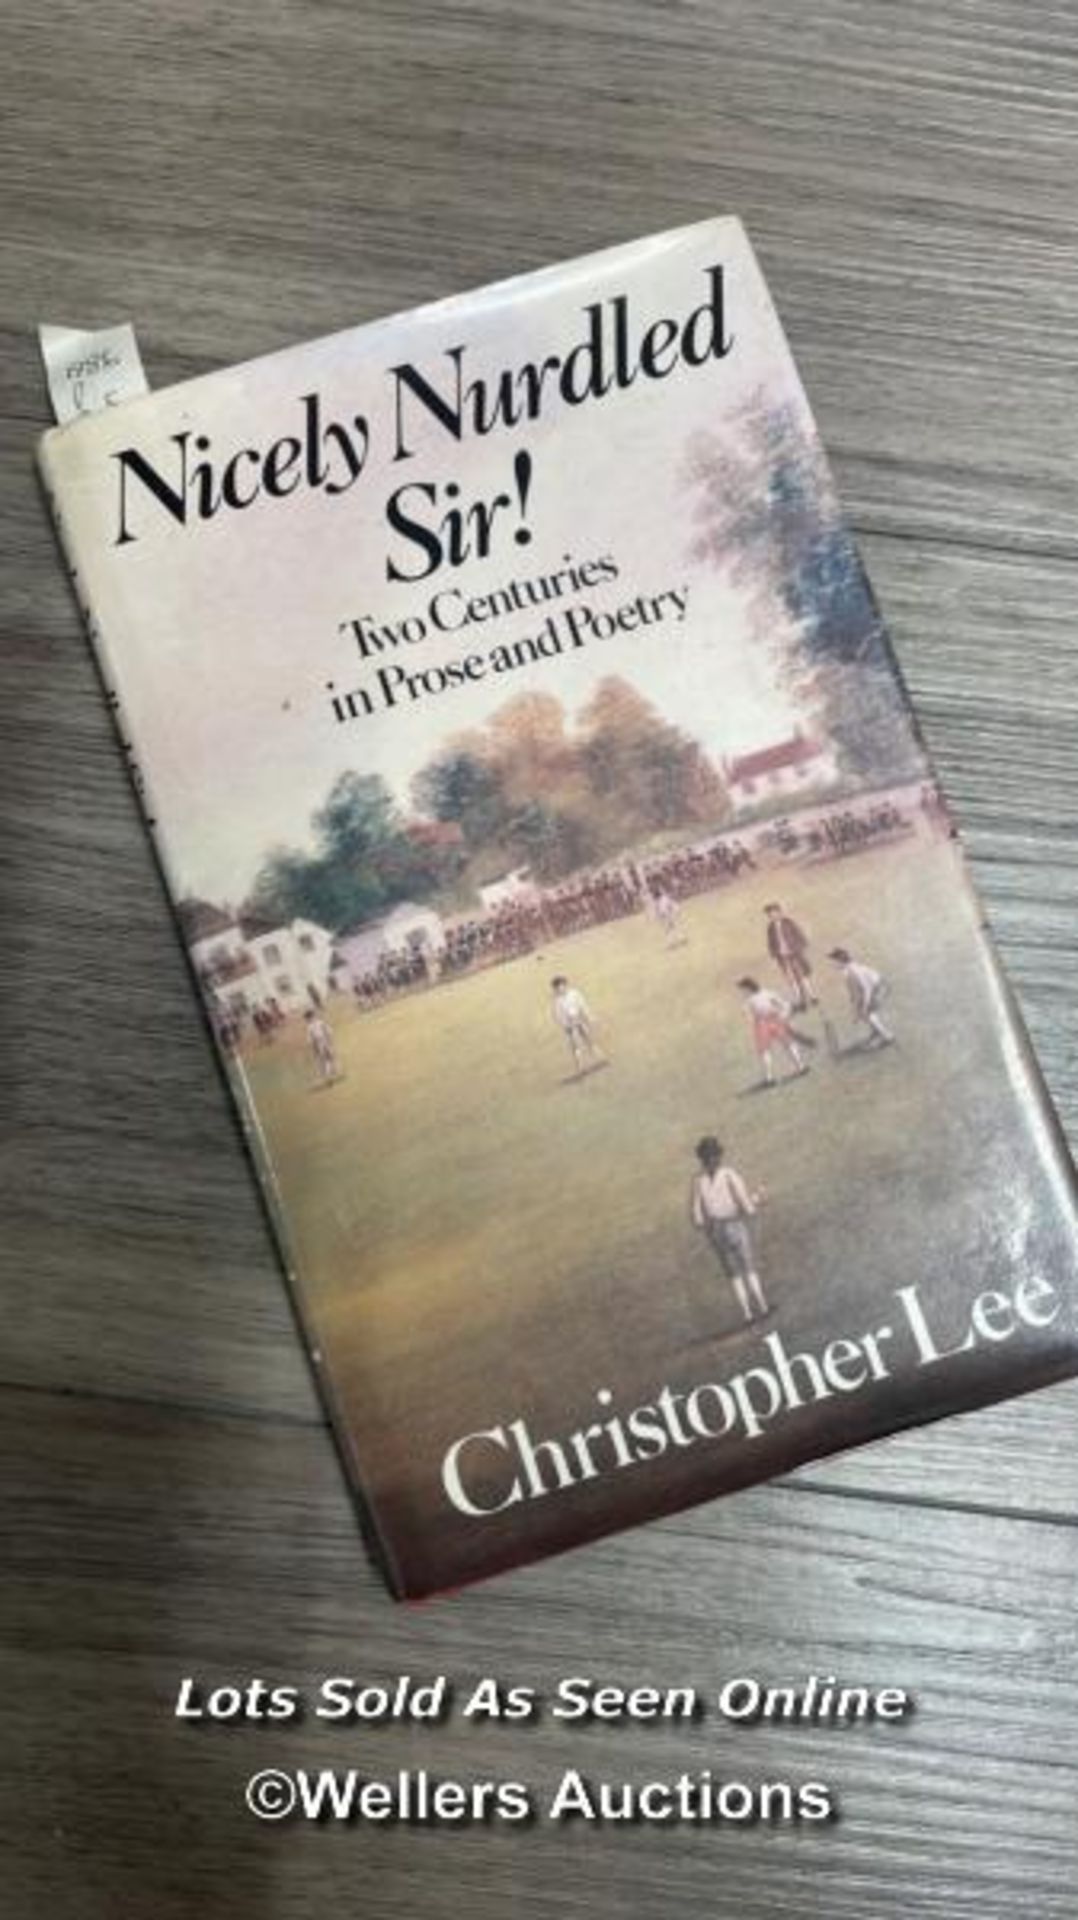 CRICKET - SIX BOOKS INCLUDING LORD'S 1787 - 1945, DAY IN THE SUN BY NEVILLE CARDUS 1948 AND NICELY - Image 5 of 6